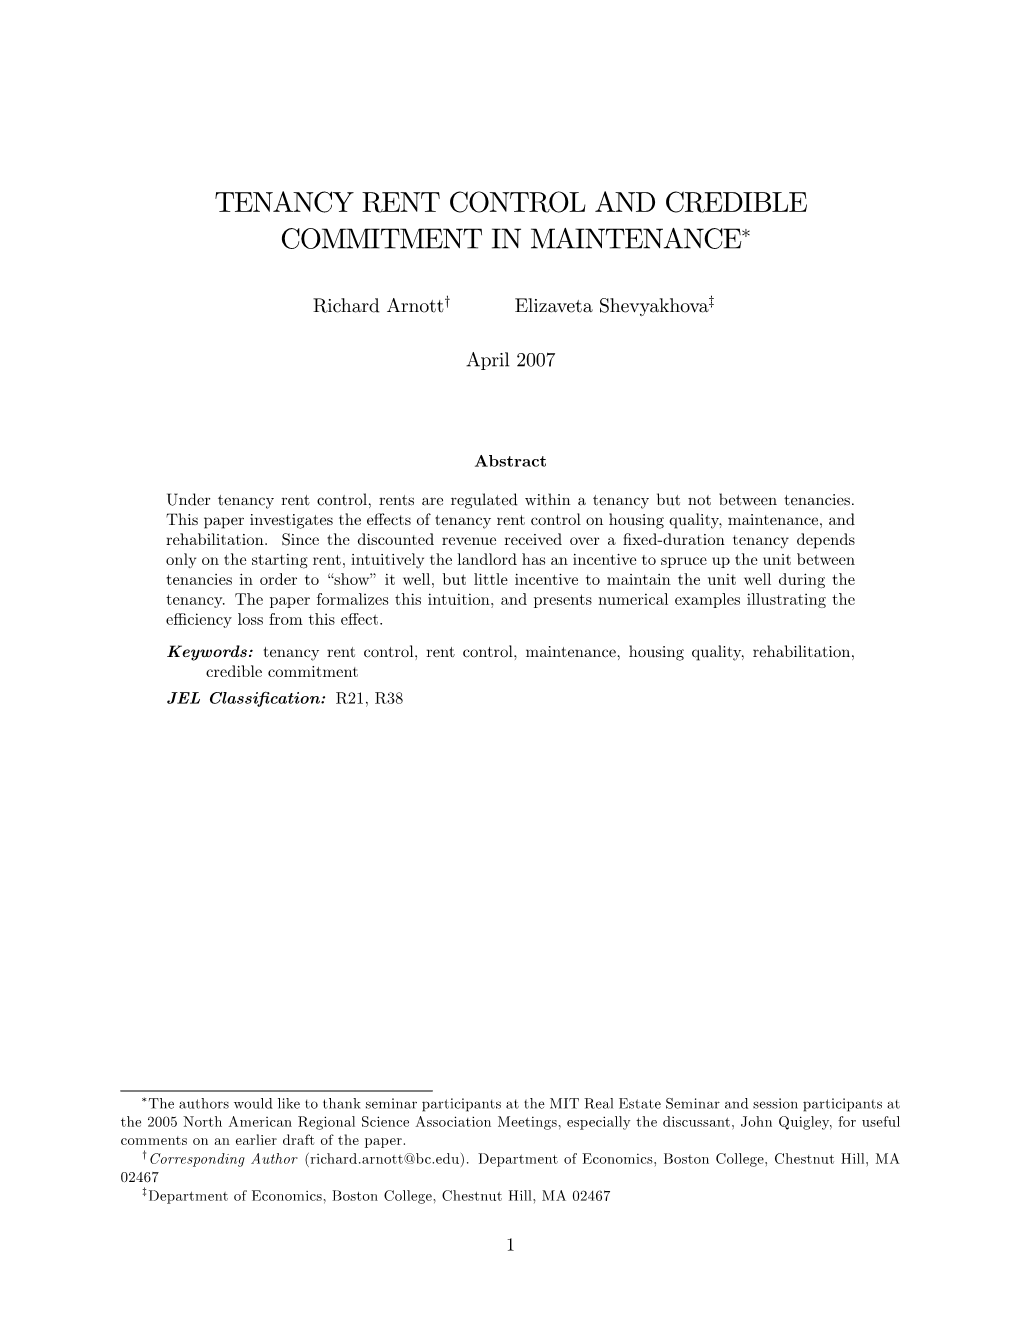 Tenancy Rent Control and Credible Commitment in Maintenance